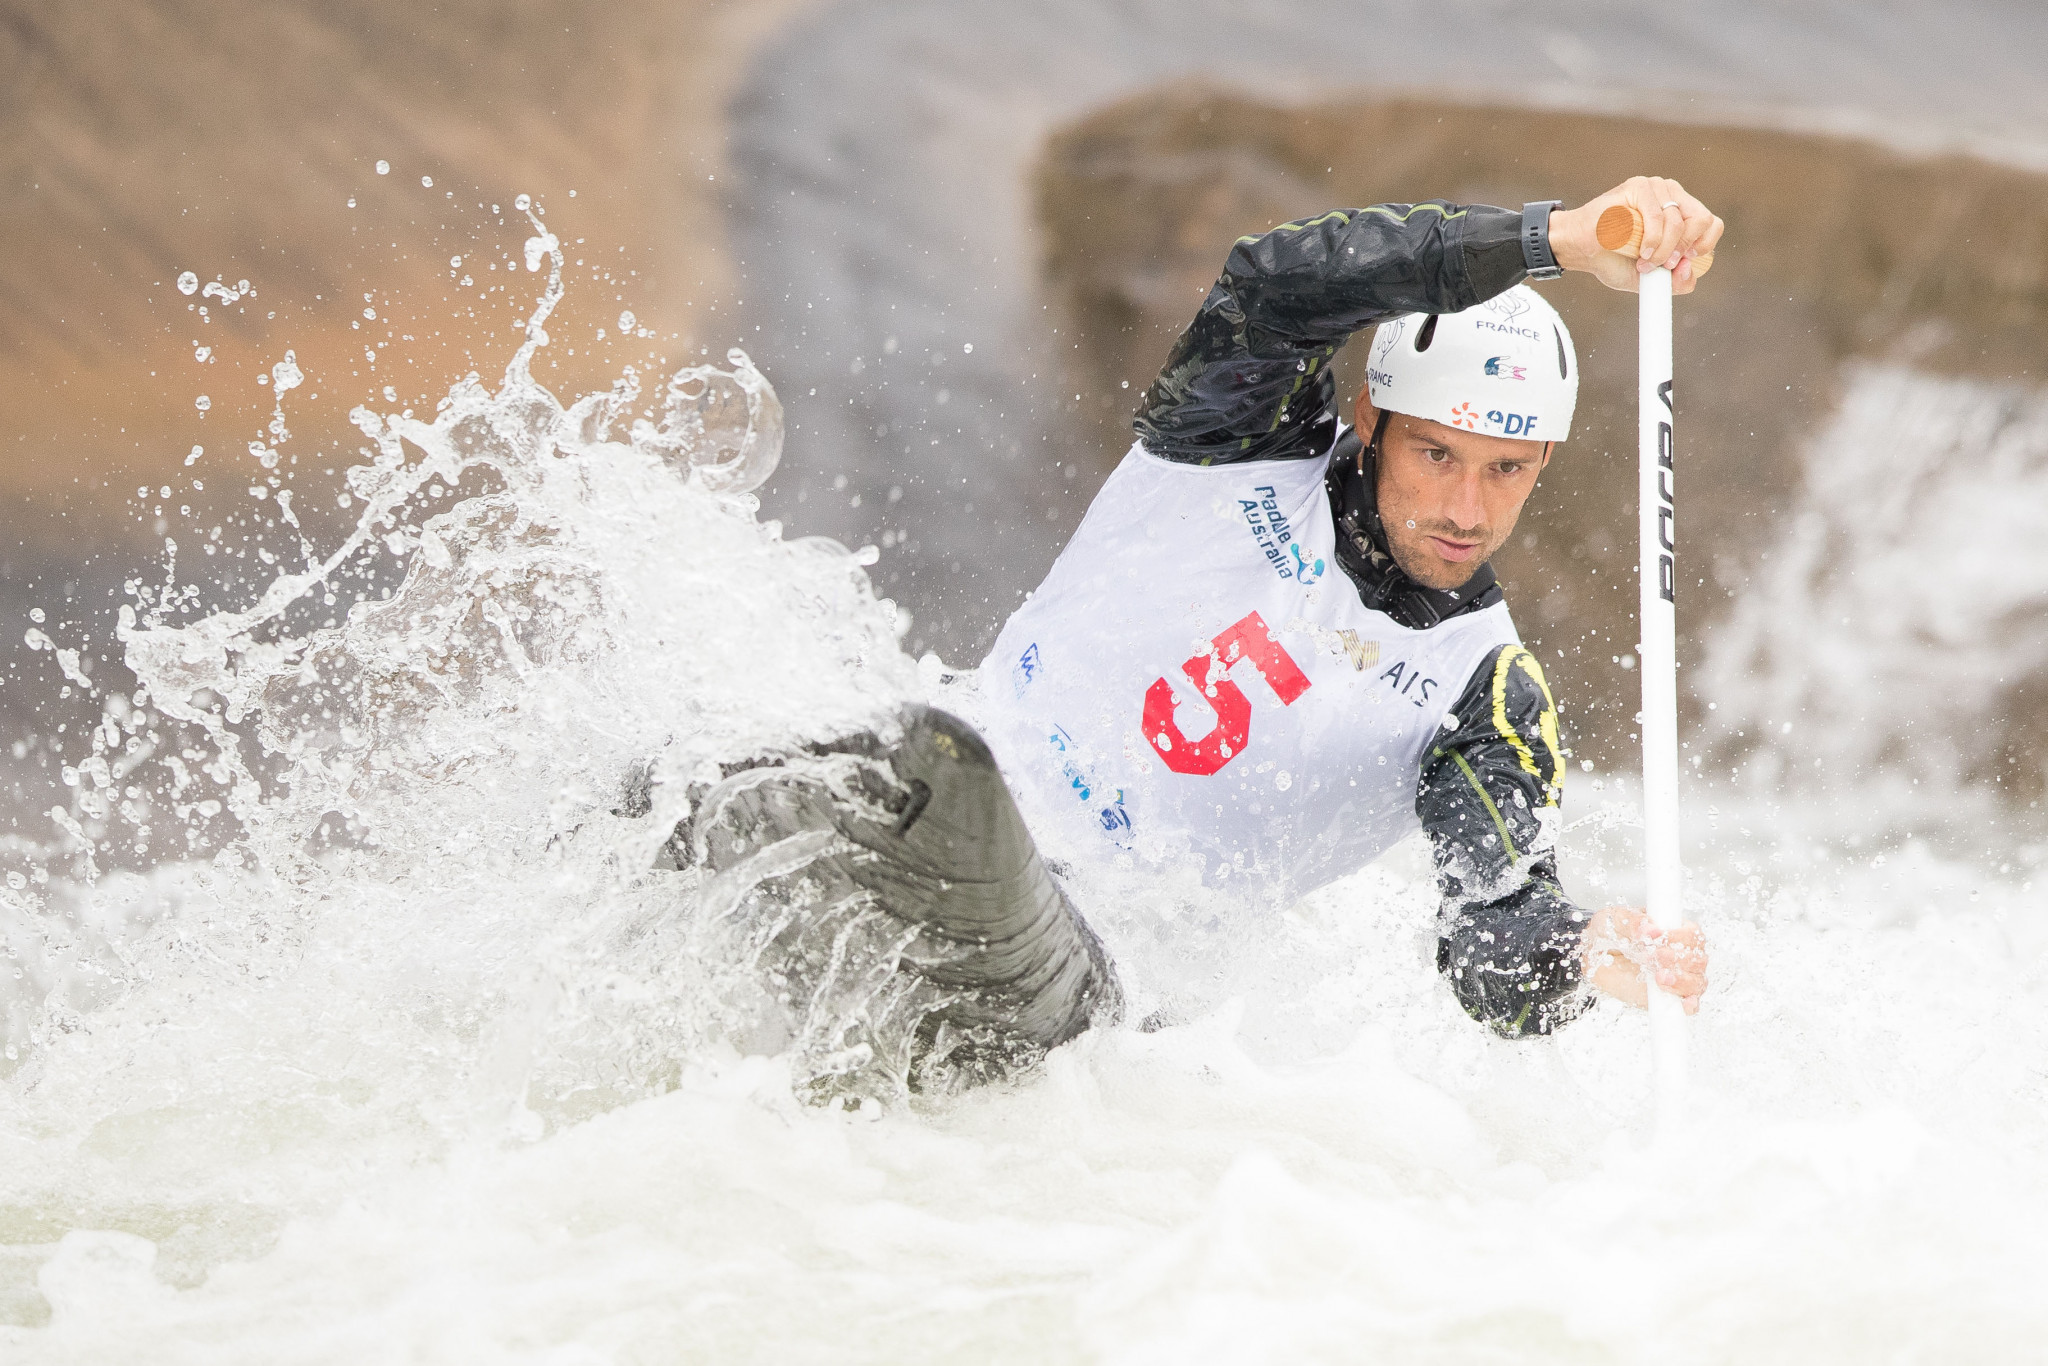 Hosts France have high medal hopes in a competitive field at Canoe Slalom European Championships